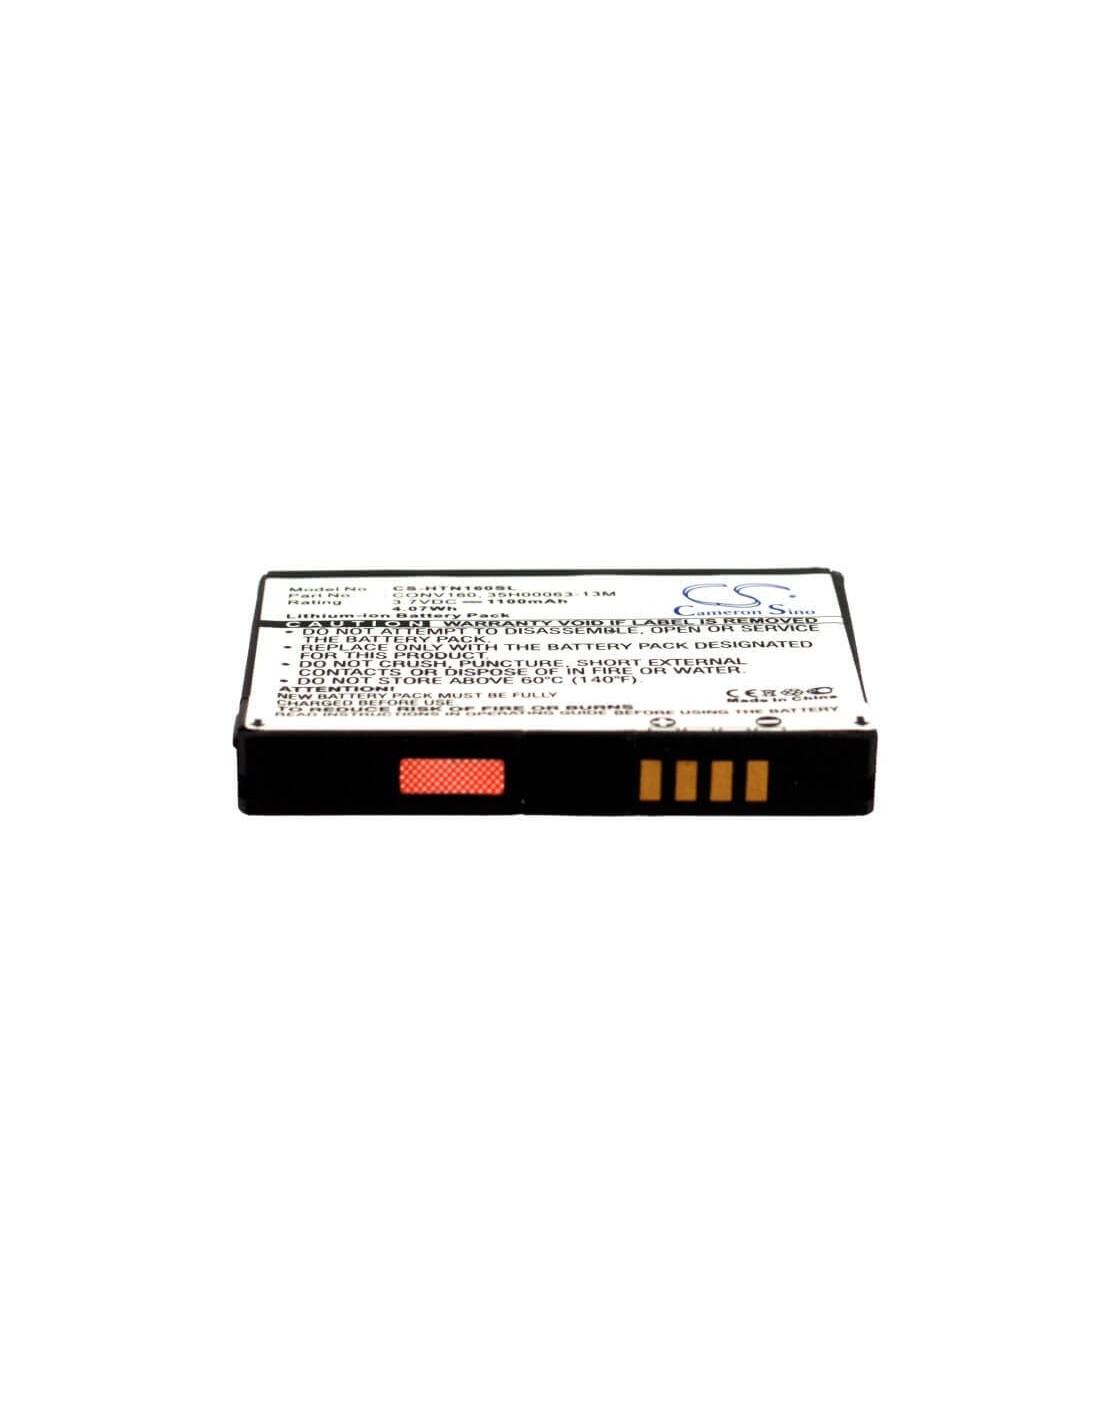 Battery for HTC H4242, Converse 100 3.7V, 1100mAh - 4.07Wh